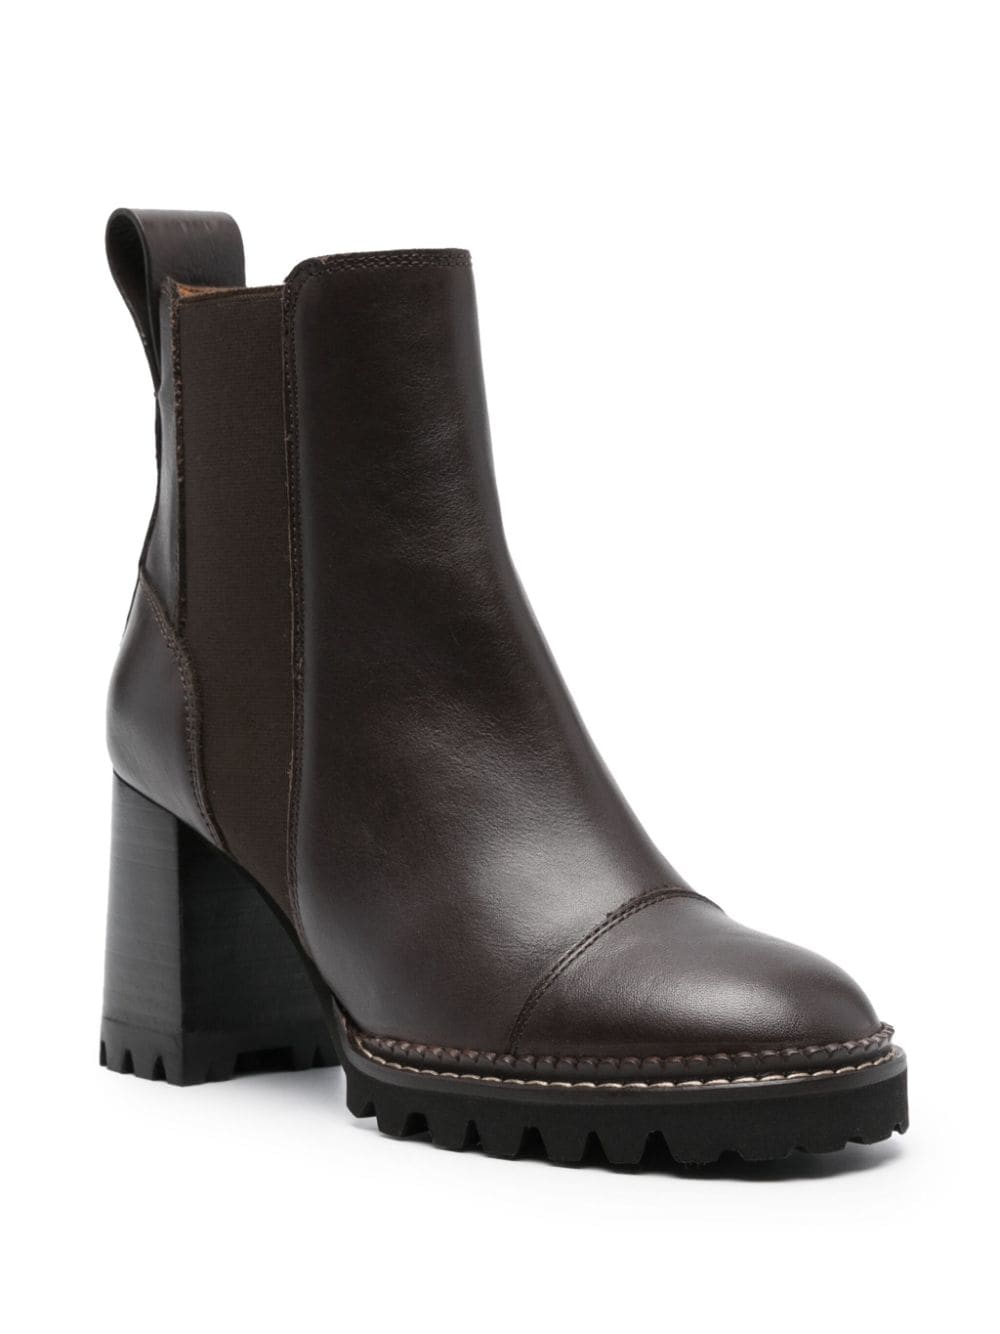 See by Chloé Mallory 95mm leather ankle boots - Bruin